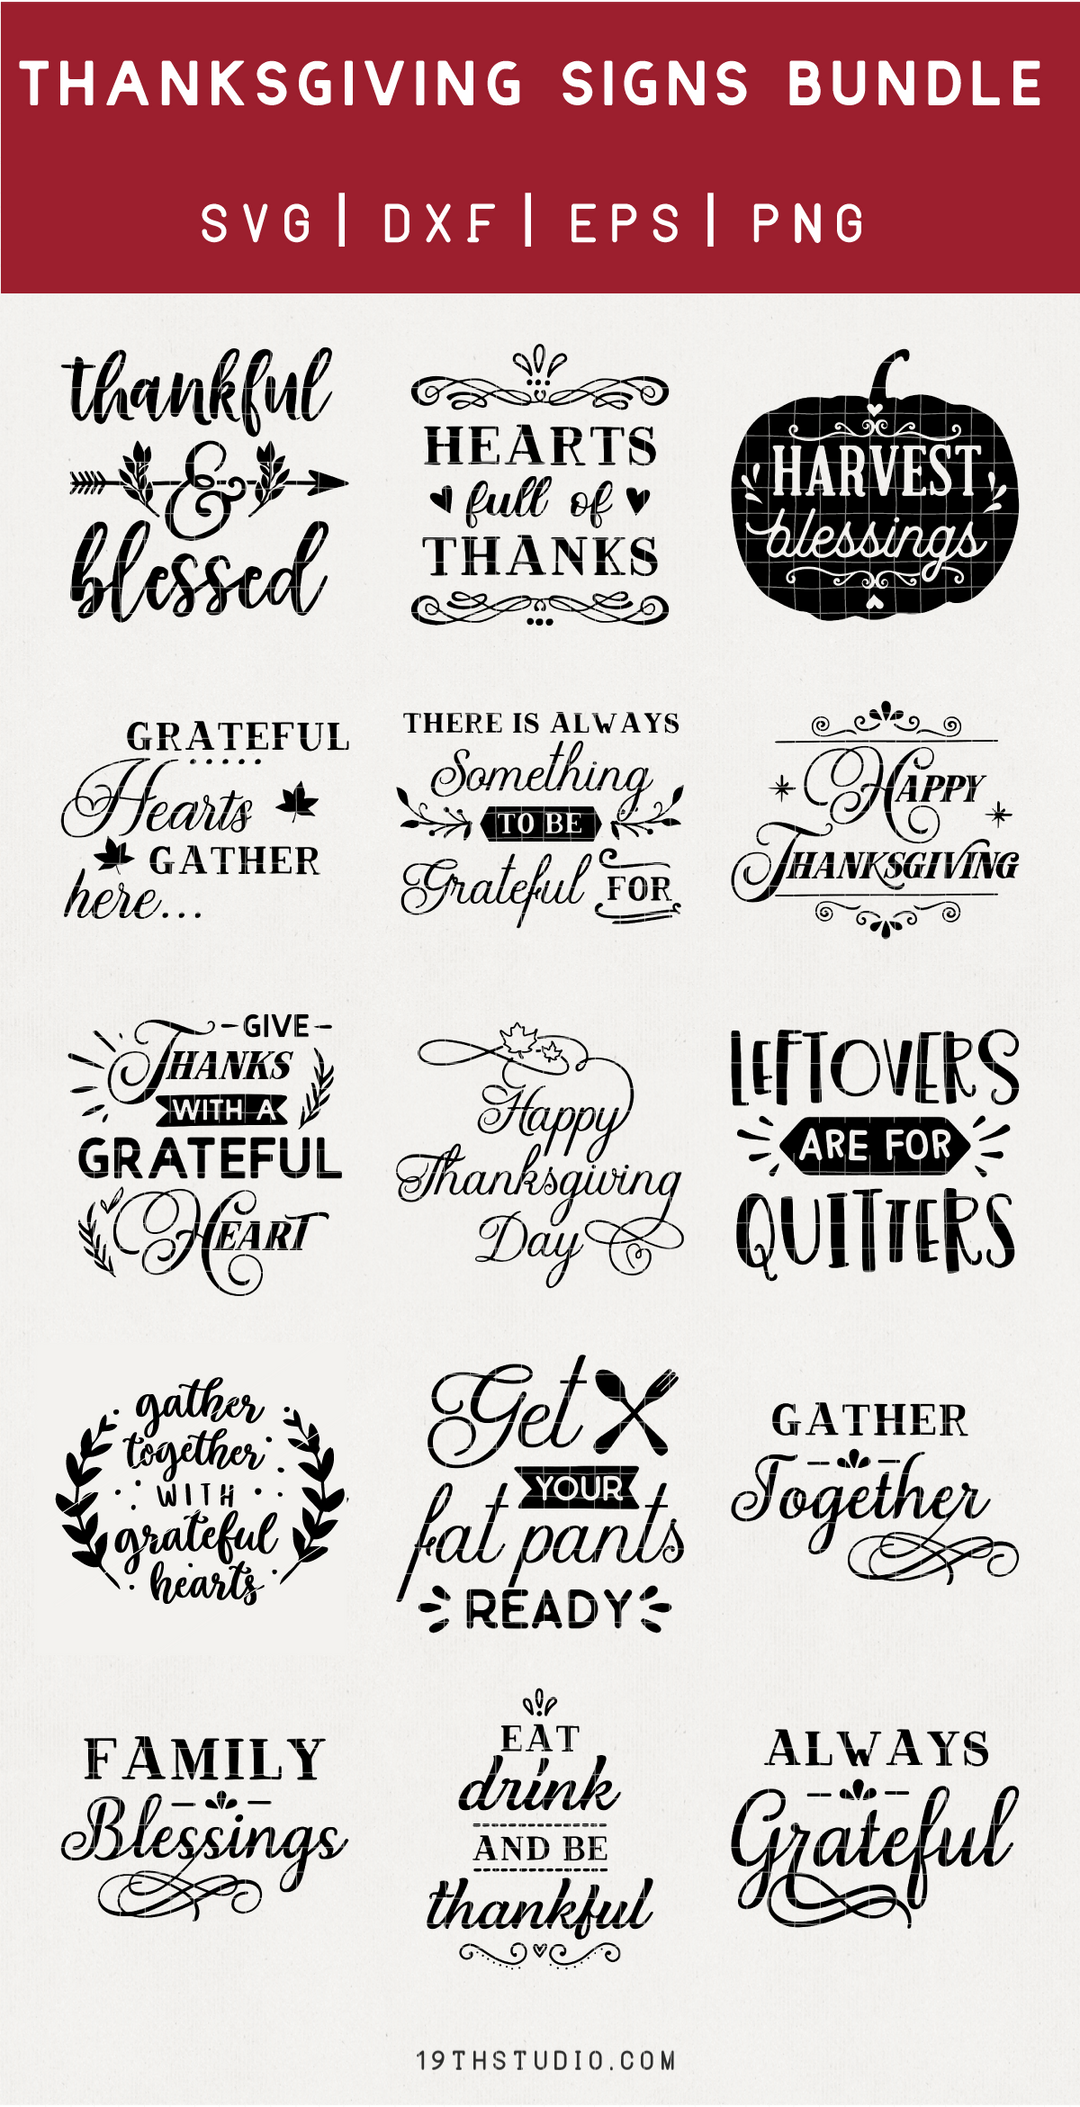 Thanksgiving signs SVG bundle - M39 Craft House SVG - SVG files for Cricut and Silhouette